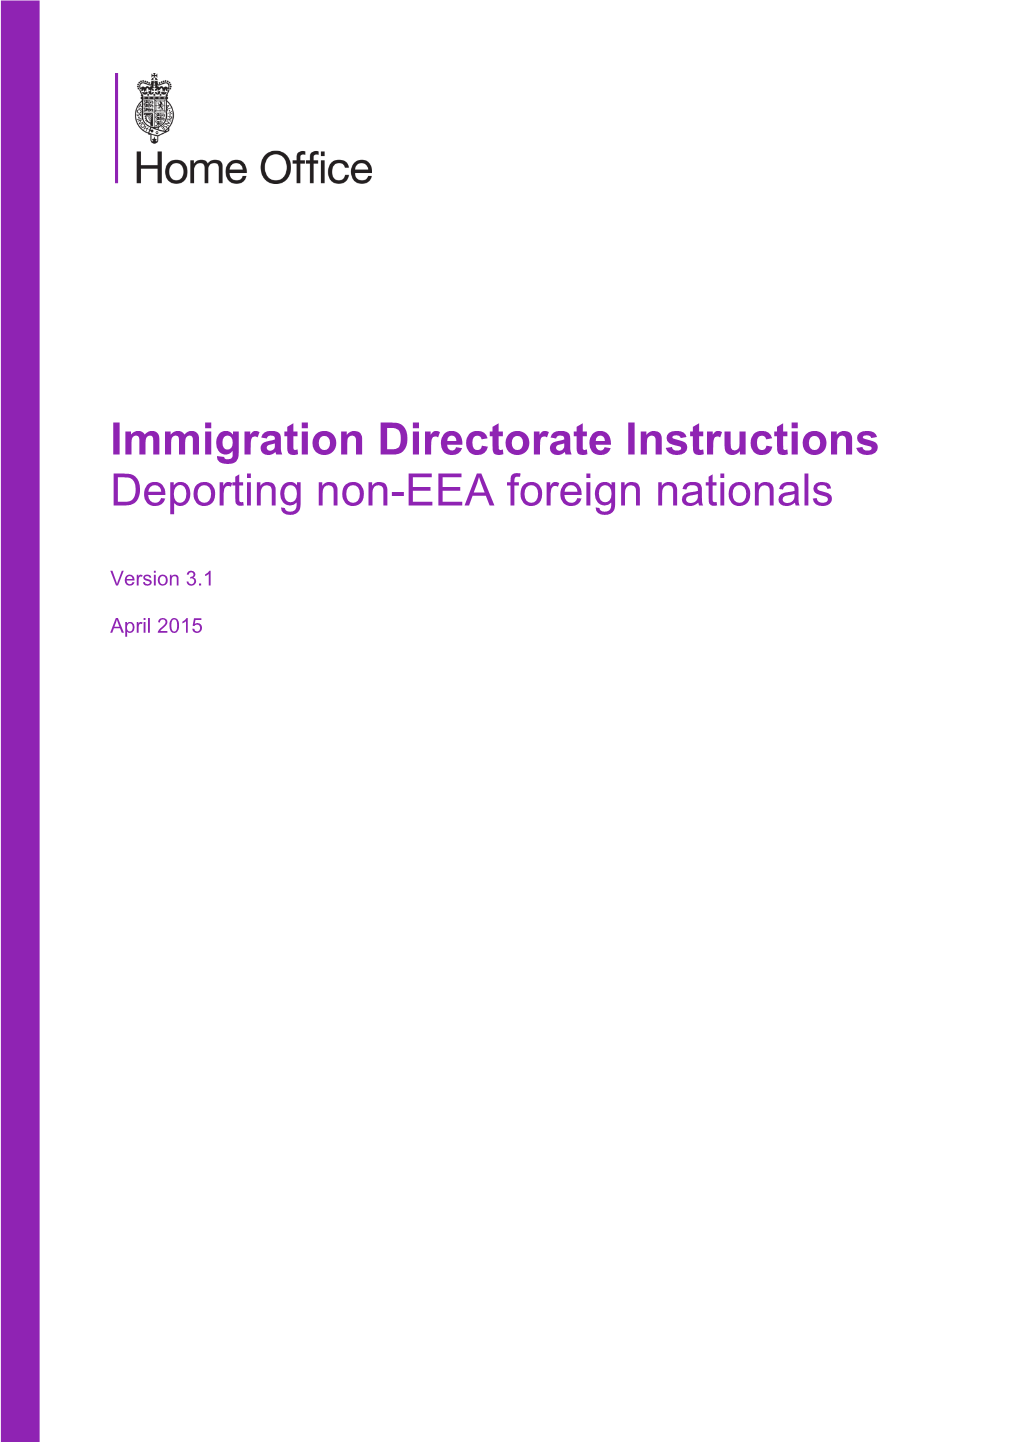 Deporting Non-EEA Foreign Nationals